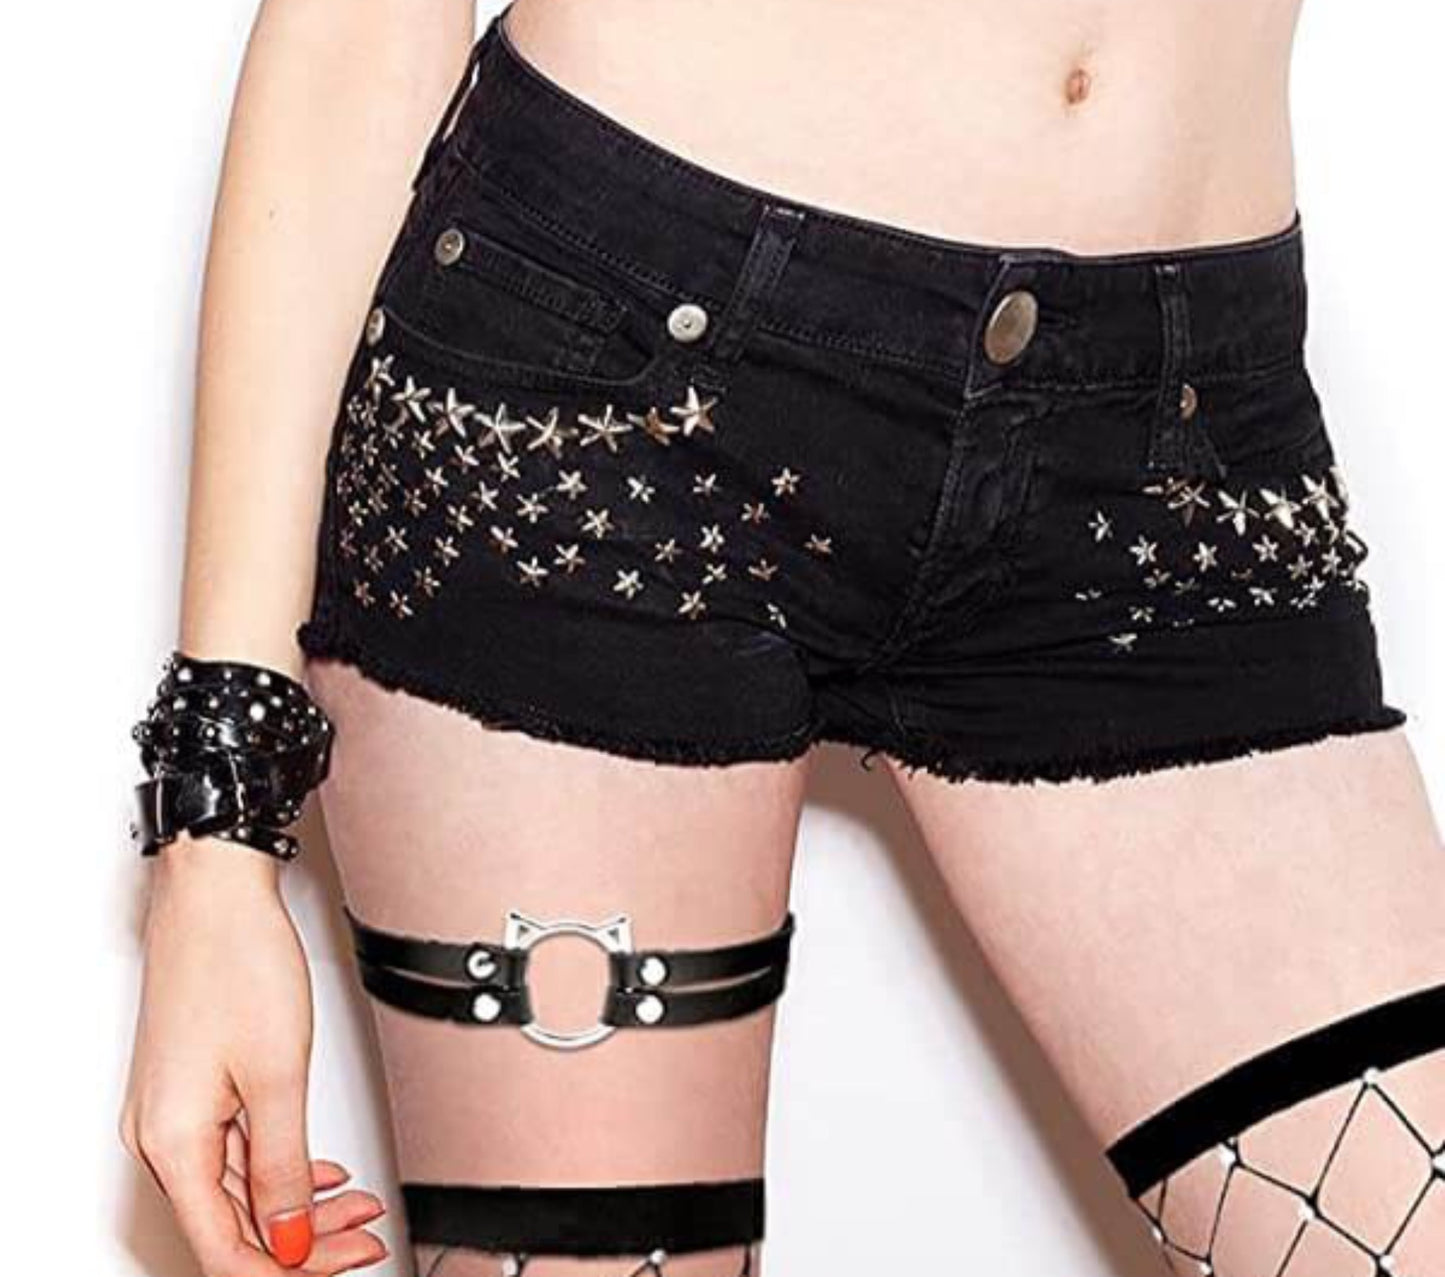 Black PU Leather Leg Garter with Cat O-Ring